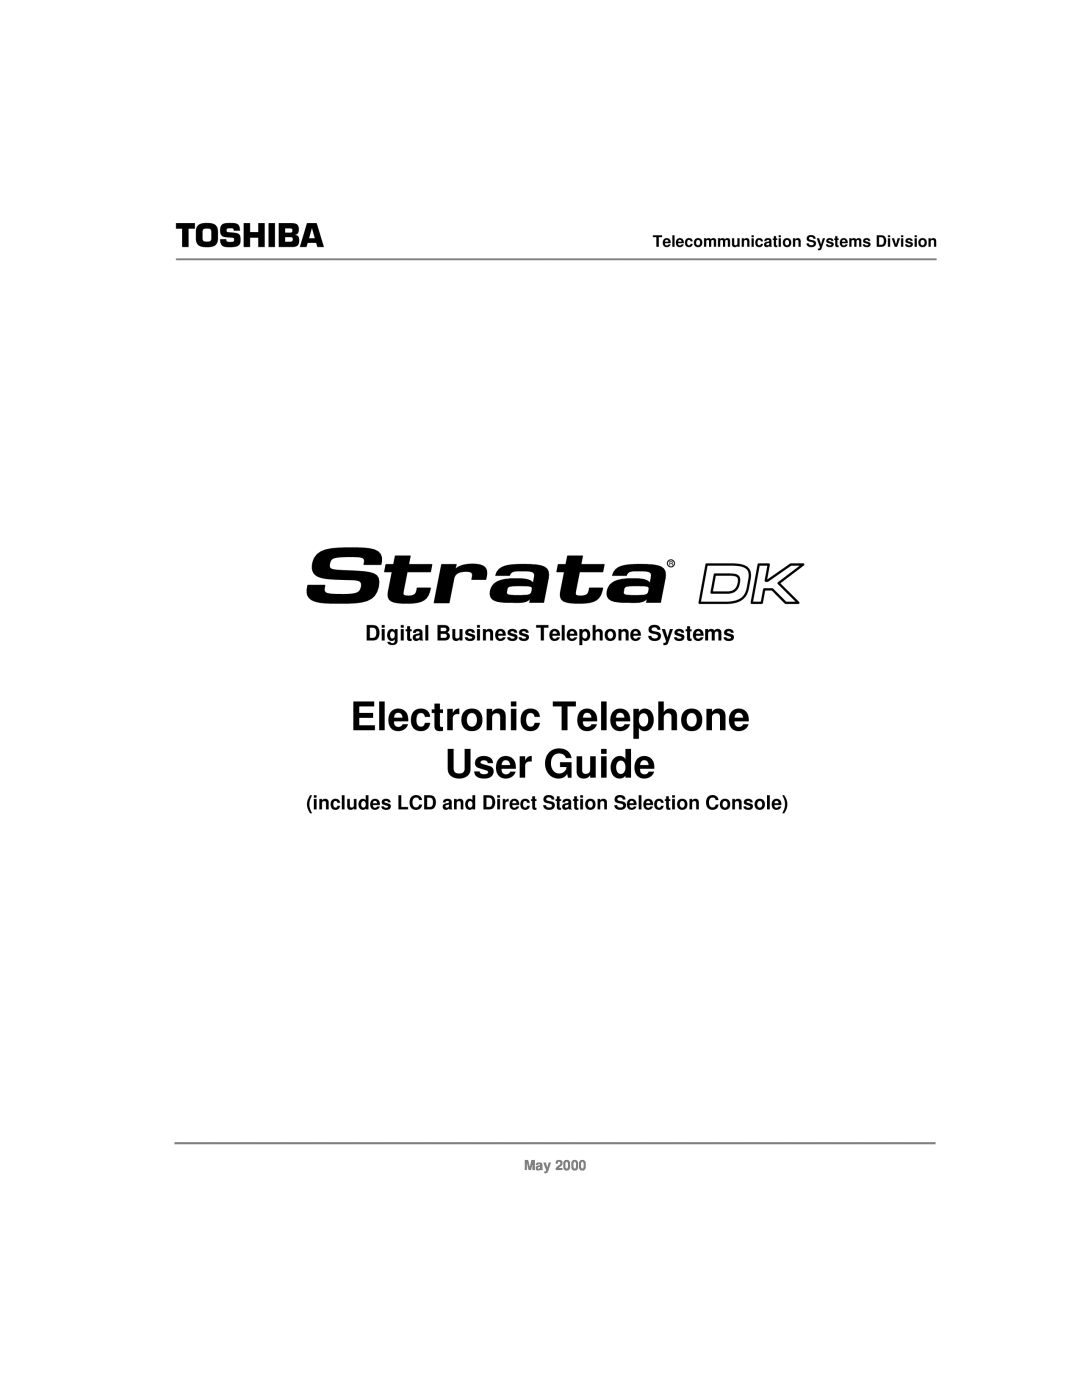 Toshiba Strata DK manual Digital Business Telephone Systems, includes LCD and Direct Station Selection Console 